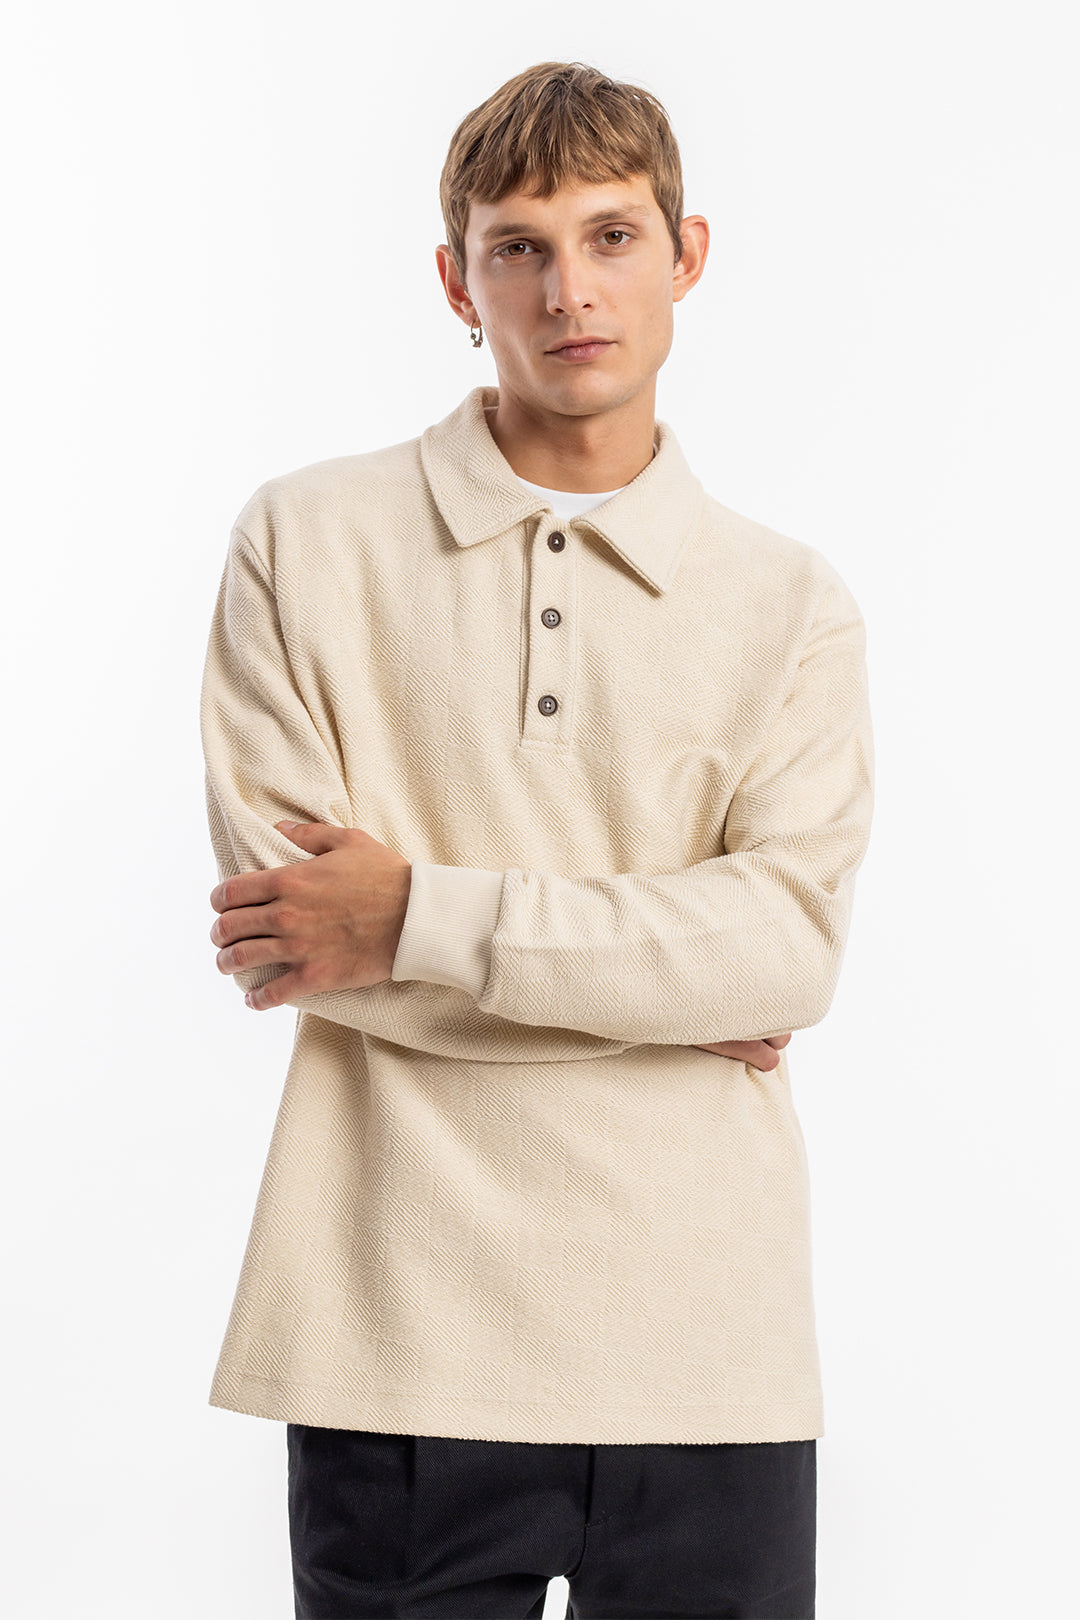 Beige, long-sleeved polo shirt made of organic cotton from Rotholz